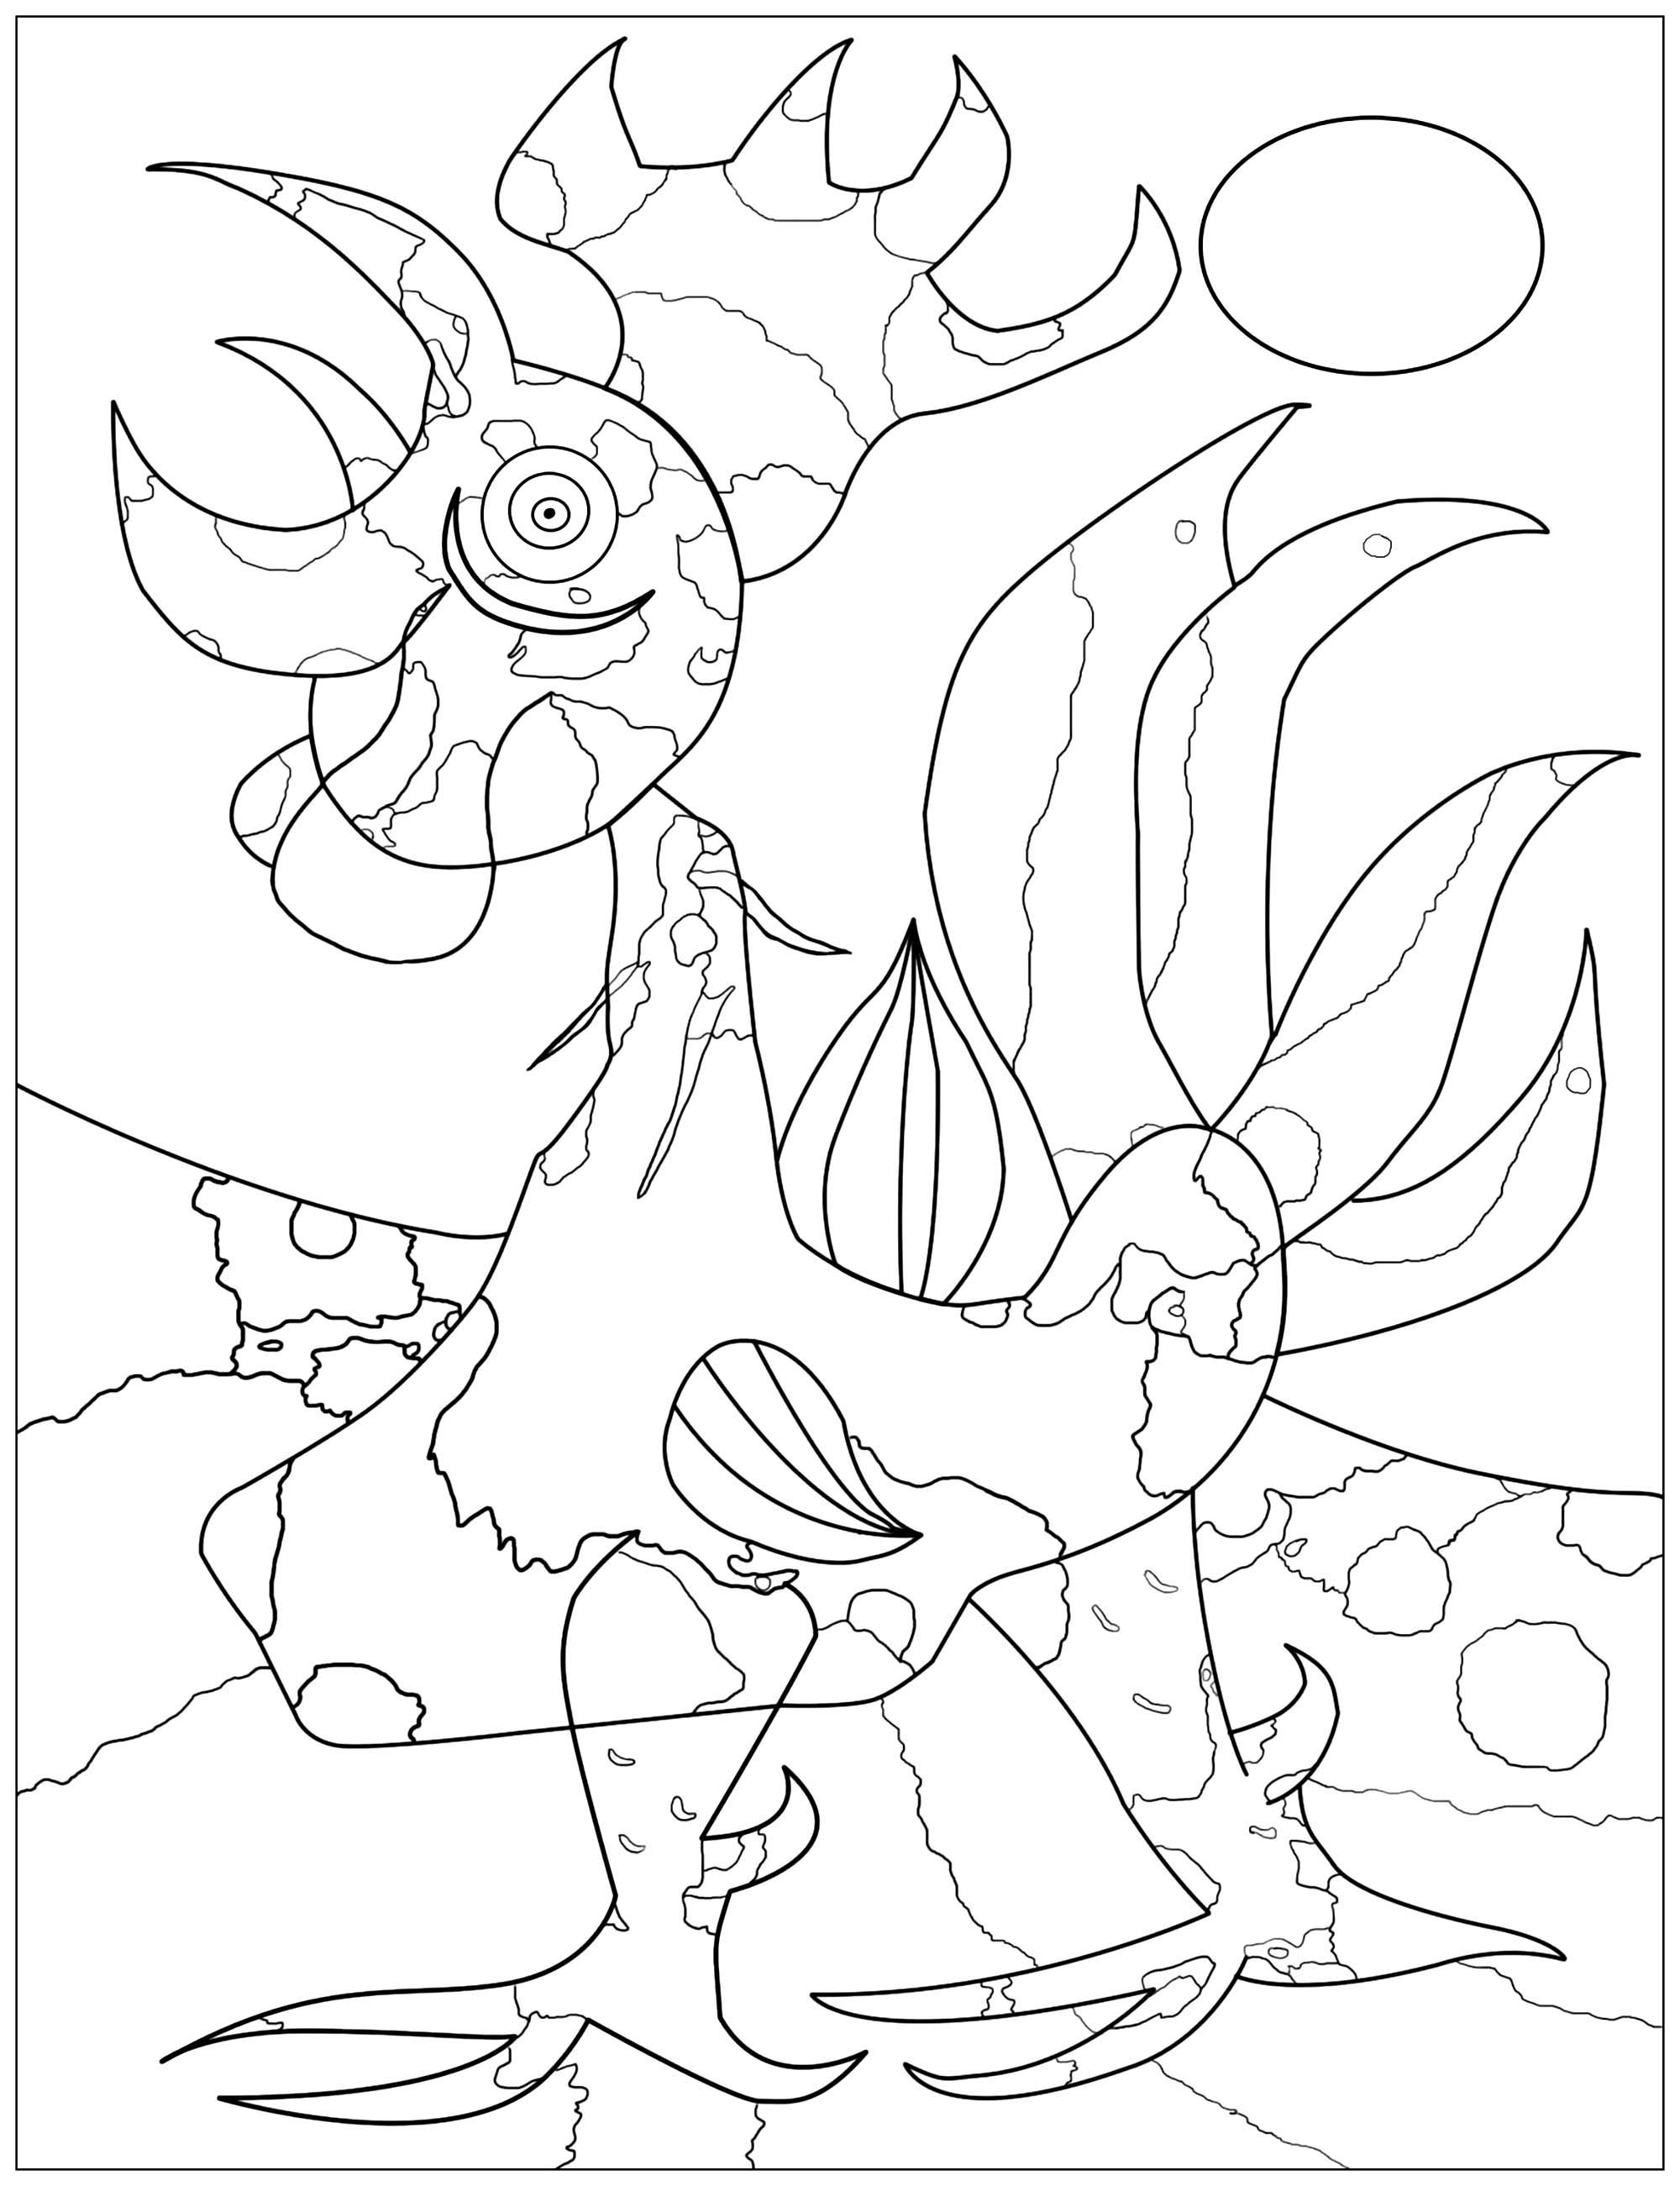 Coloring based on Joan Miro's painting The Rooster (1949). This coloring page is inspired by Joan Miro's painting The Rooster (1949). It's an ideal coloring page for children who love art and color.